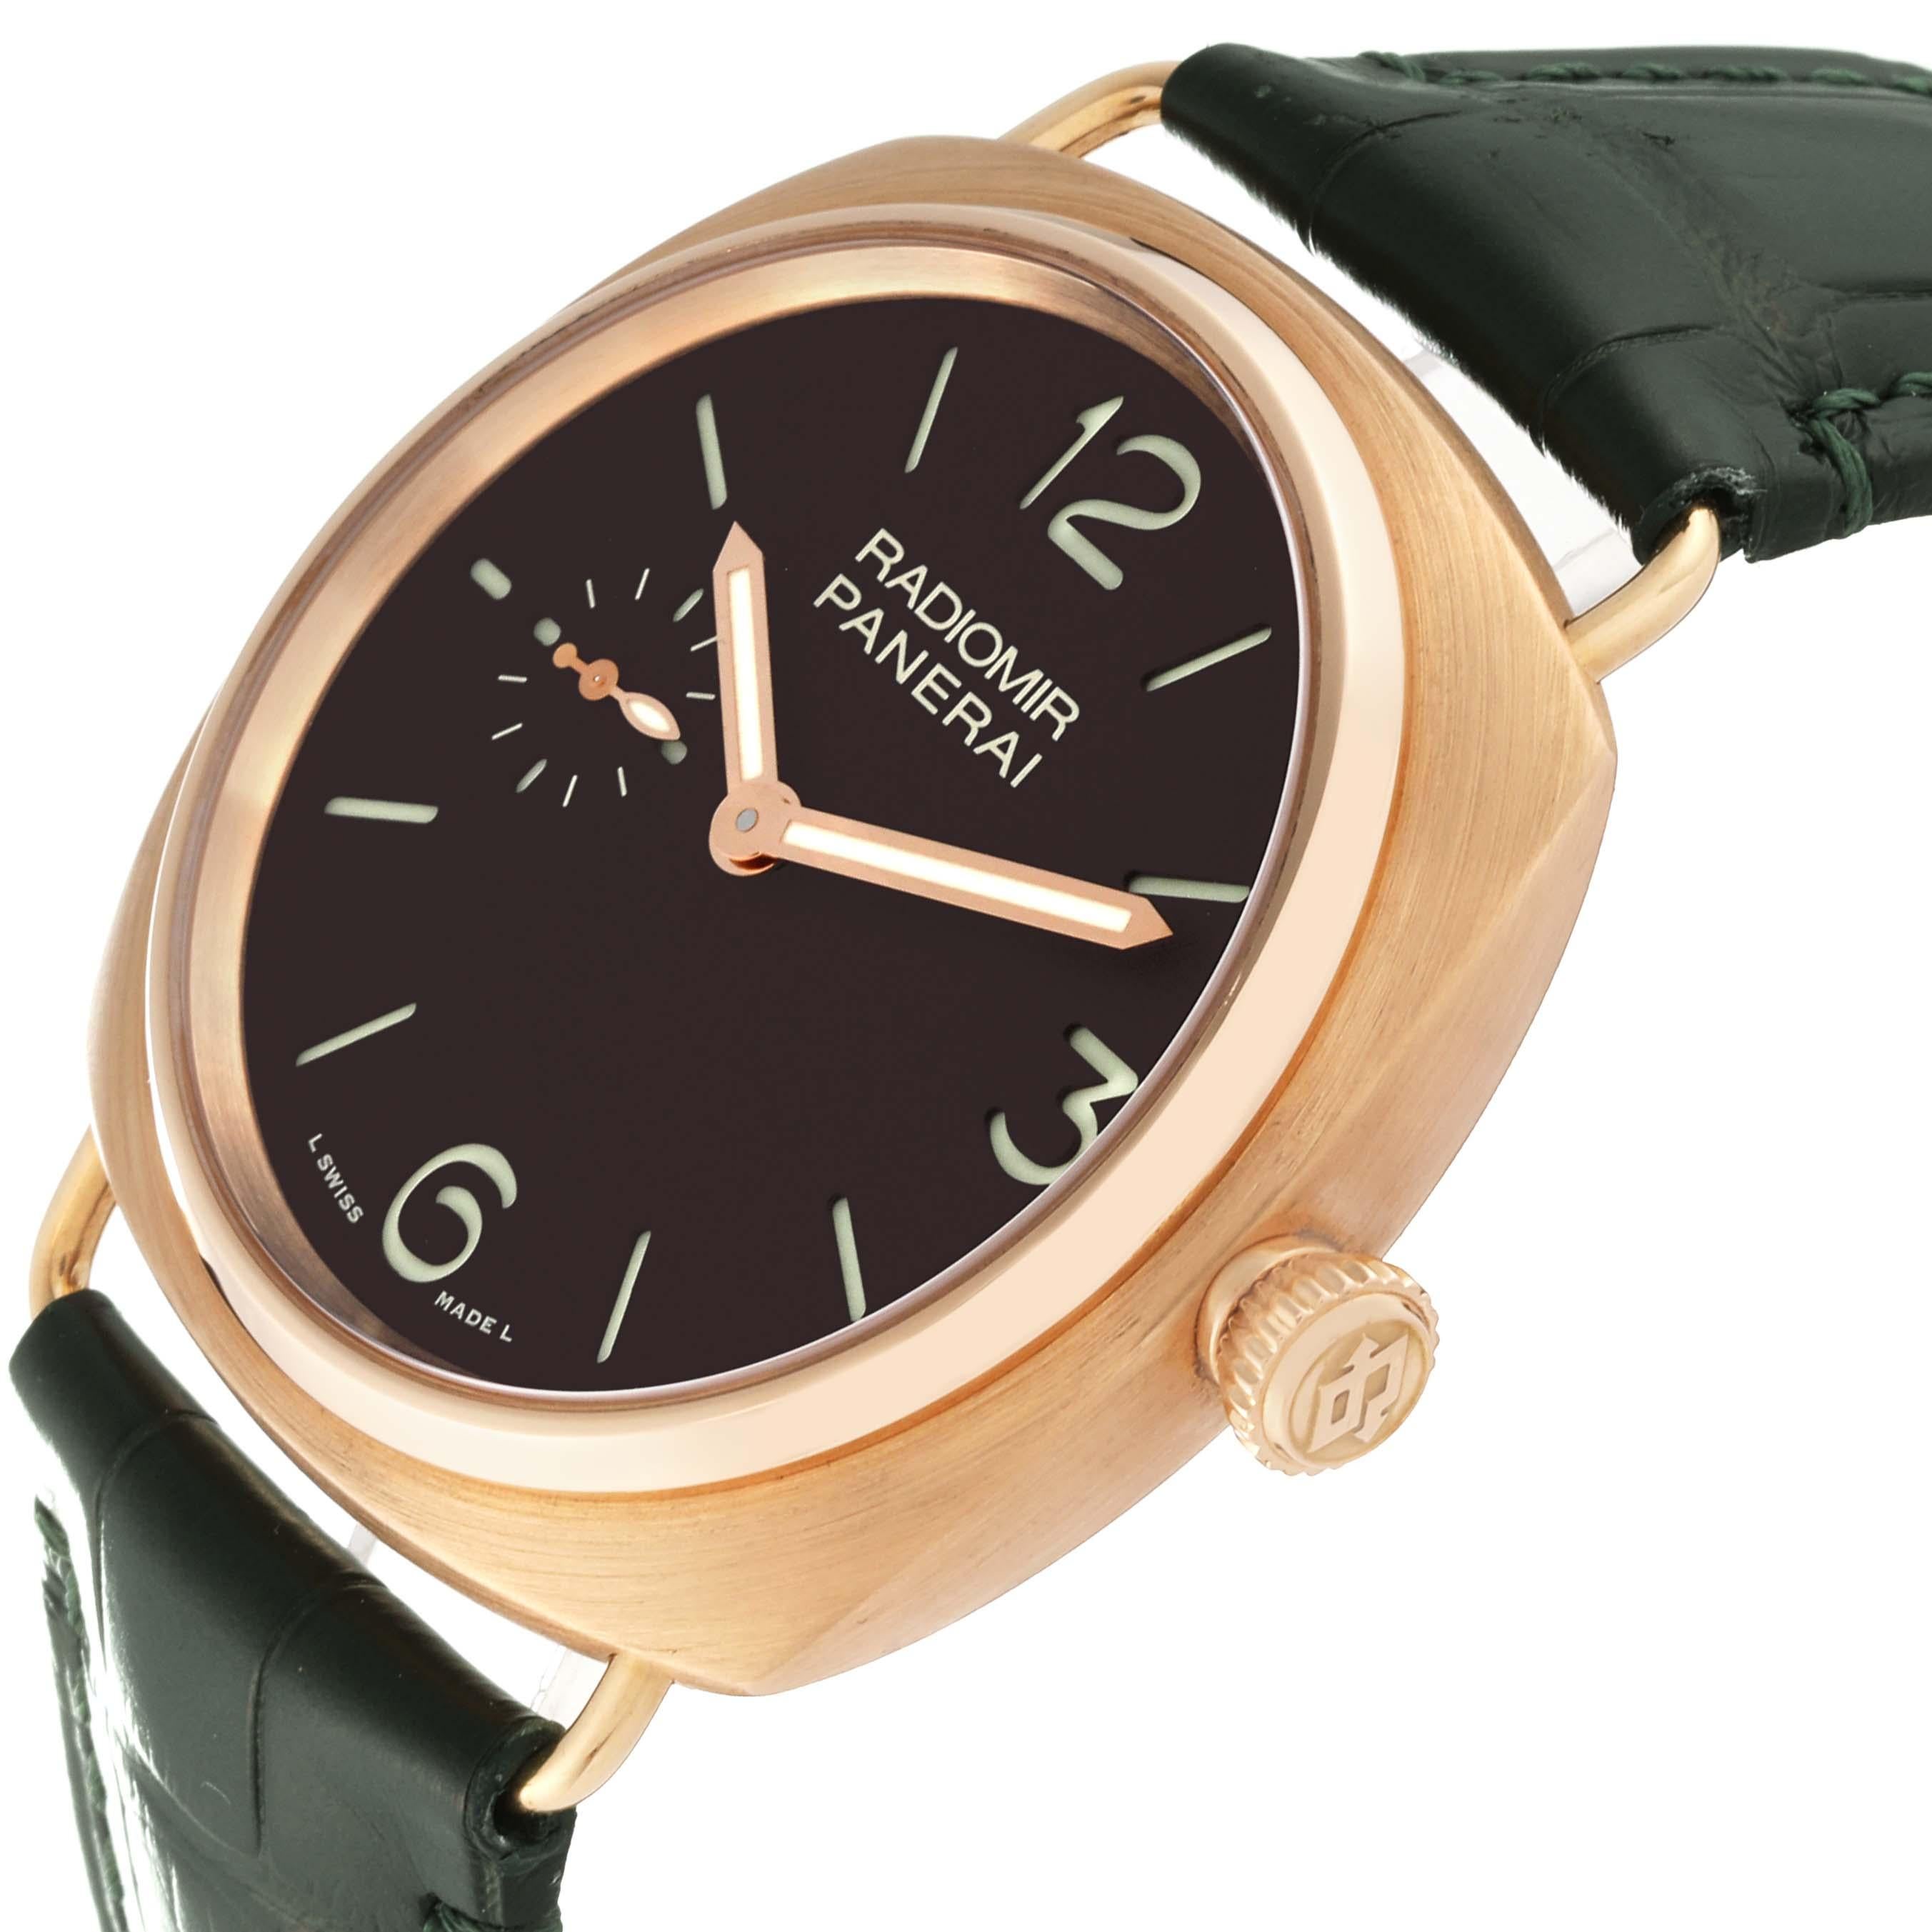 Panerai Radiomir Limited Edition Rose Gold Mens Watch PAM00336 Box Papers For Sale 2